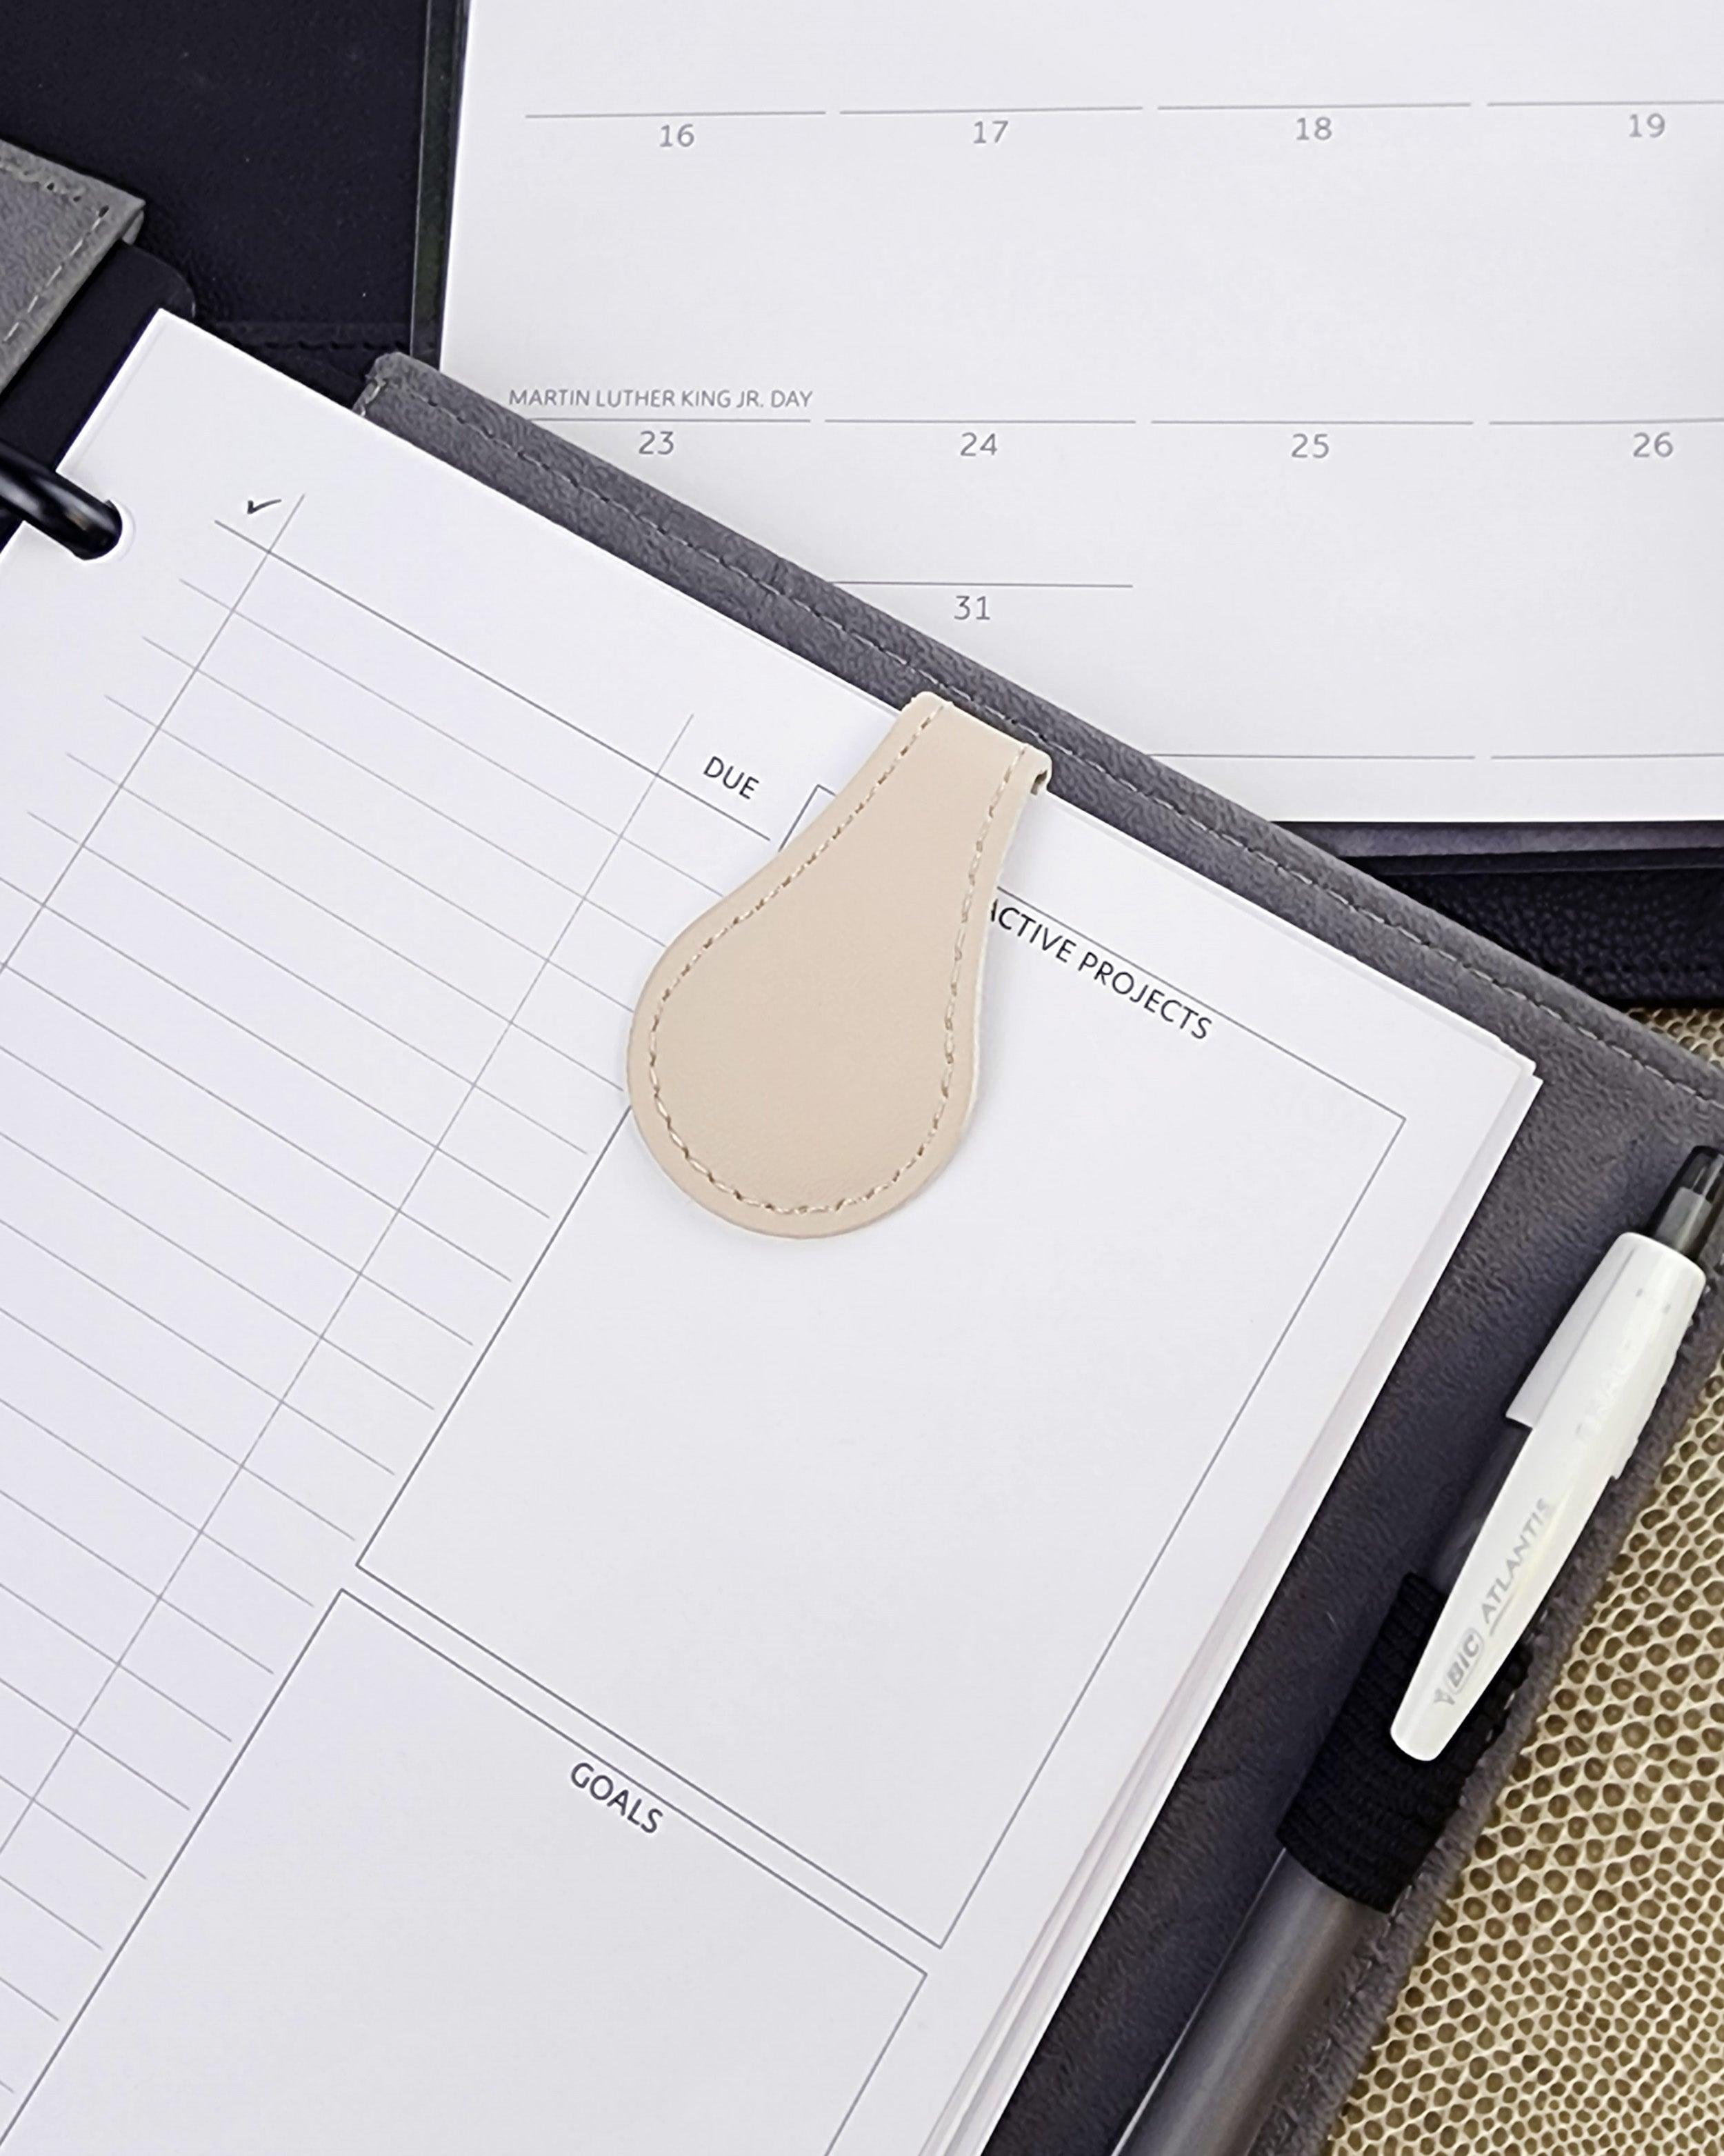 Leather magnet clip for stationary by Janes Agenda, a discbound and six ring planner company..